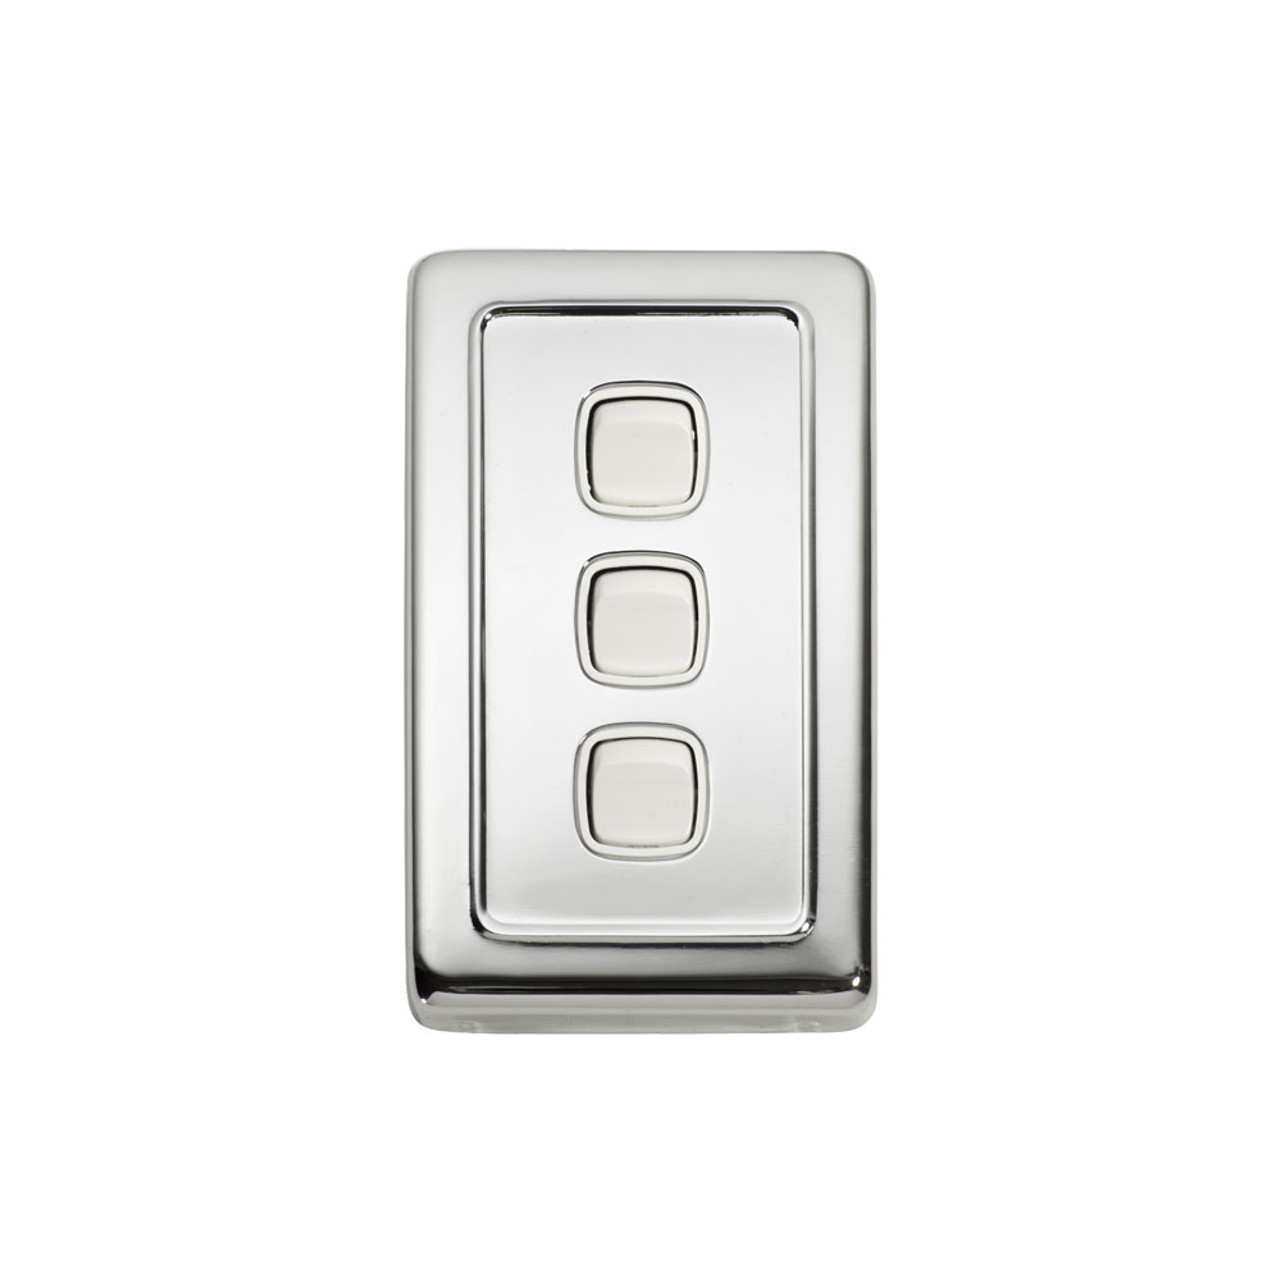 3 Gang Flat Plate Heritage Light Switch - Chrome Plate with White Rocker